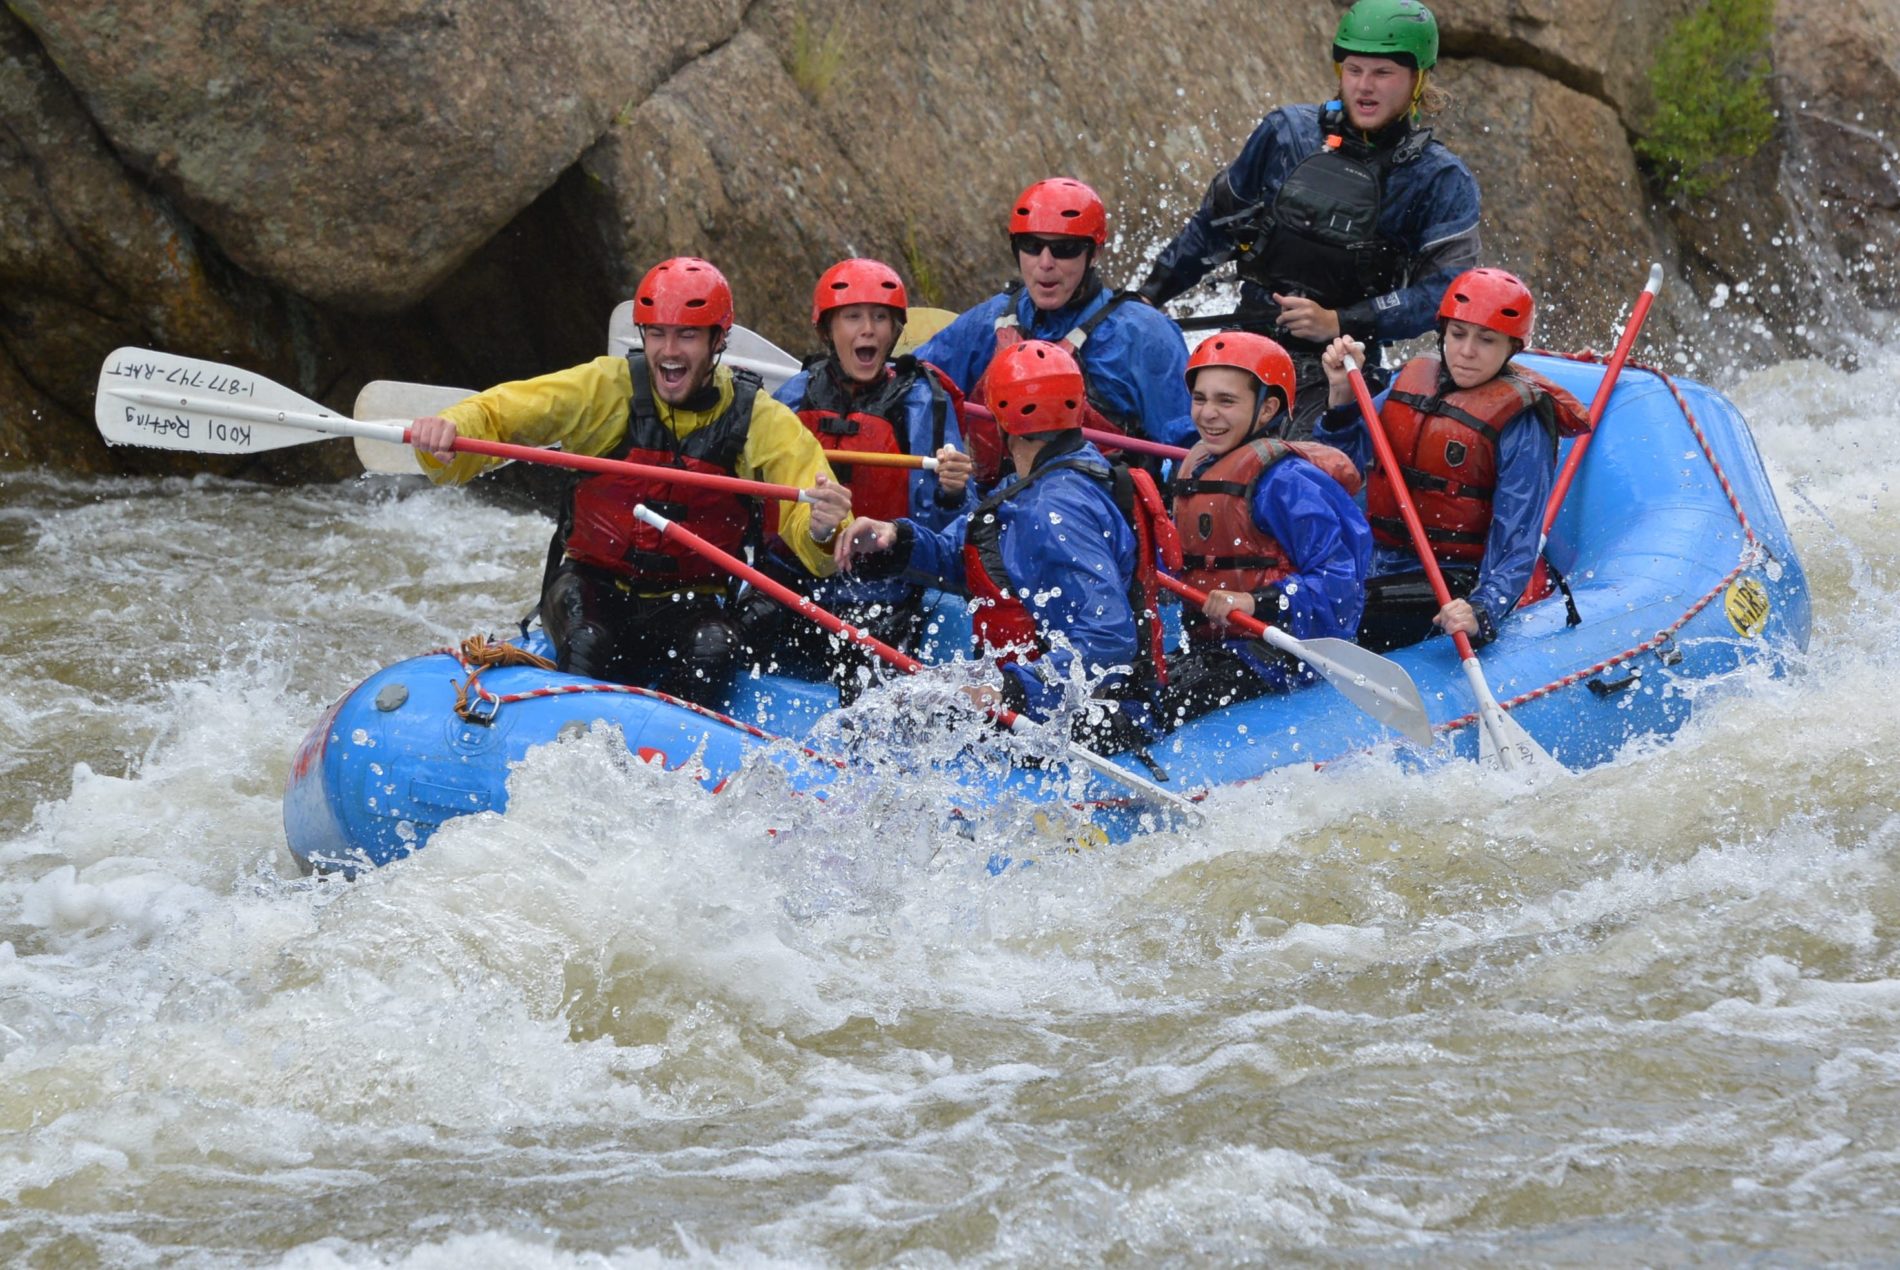 Whitewater Rafting In Colorado: Enjoy The Thrill With Kodi